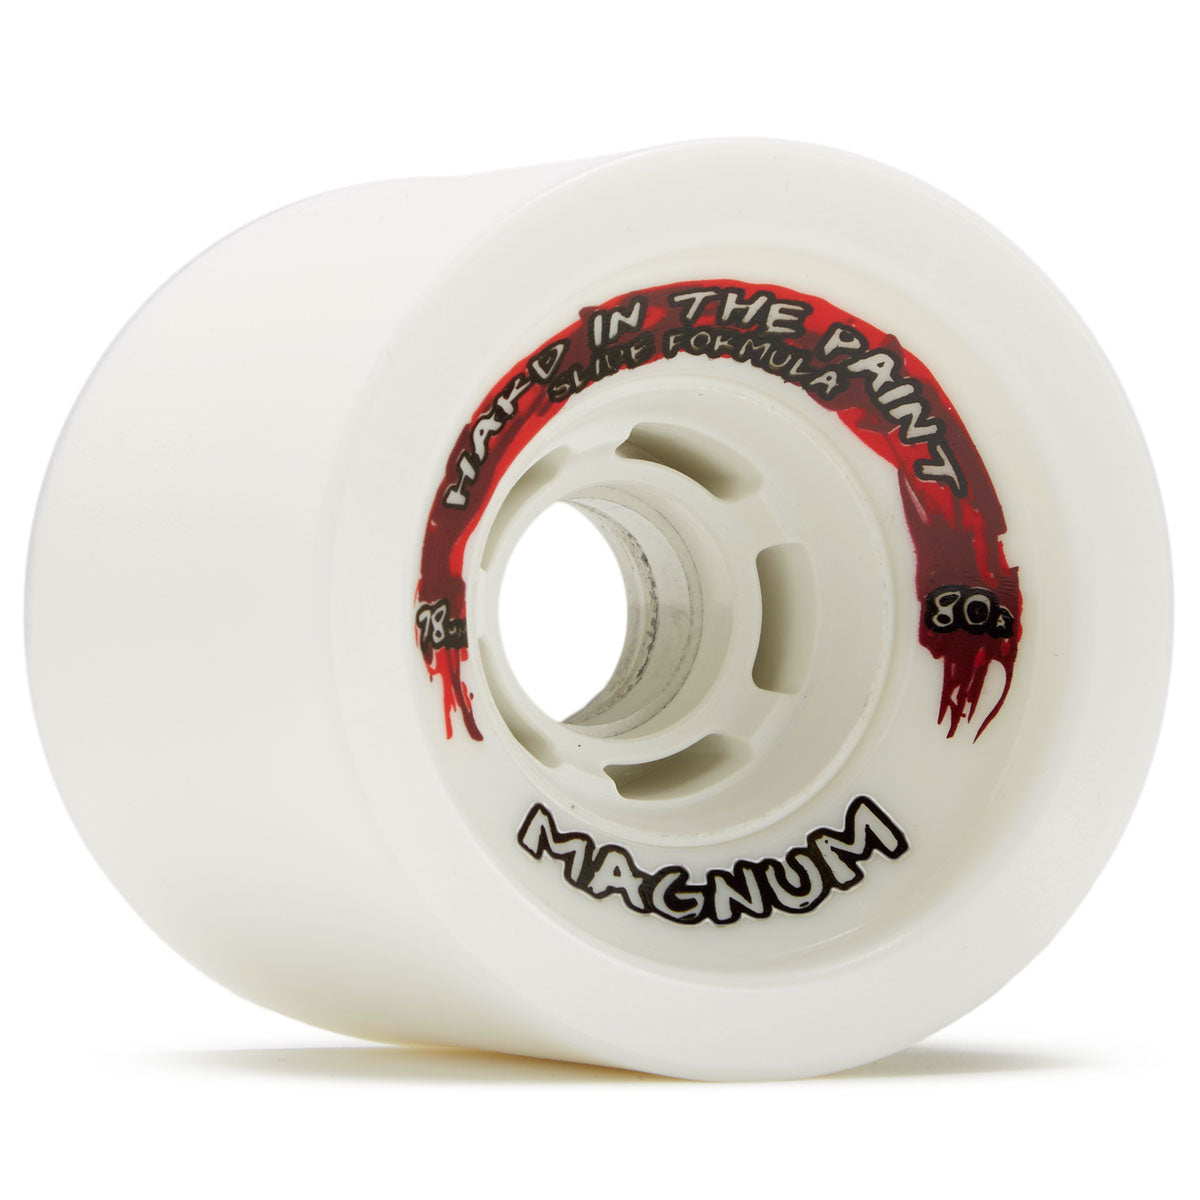 Venom Hard In The Paint Magnum 80a Longboard Wheels - White - 78mm image 1